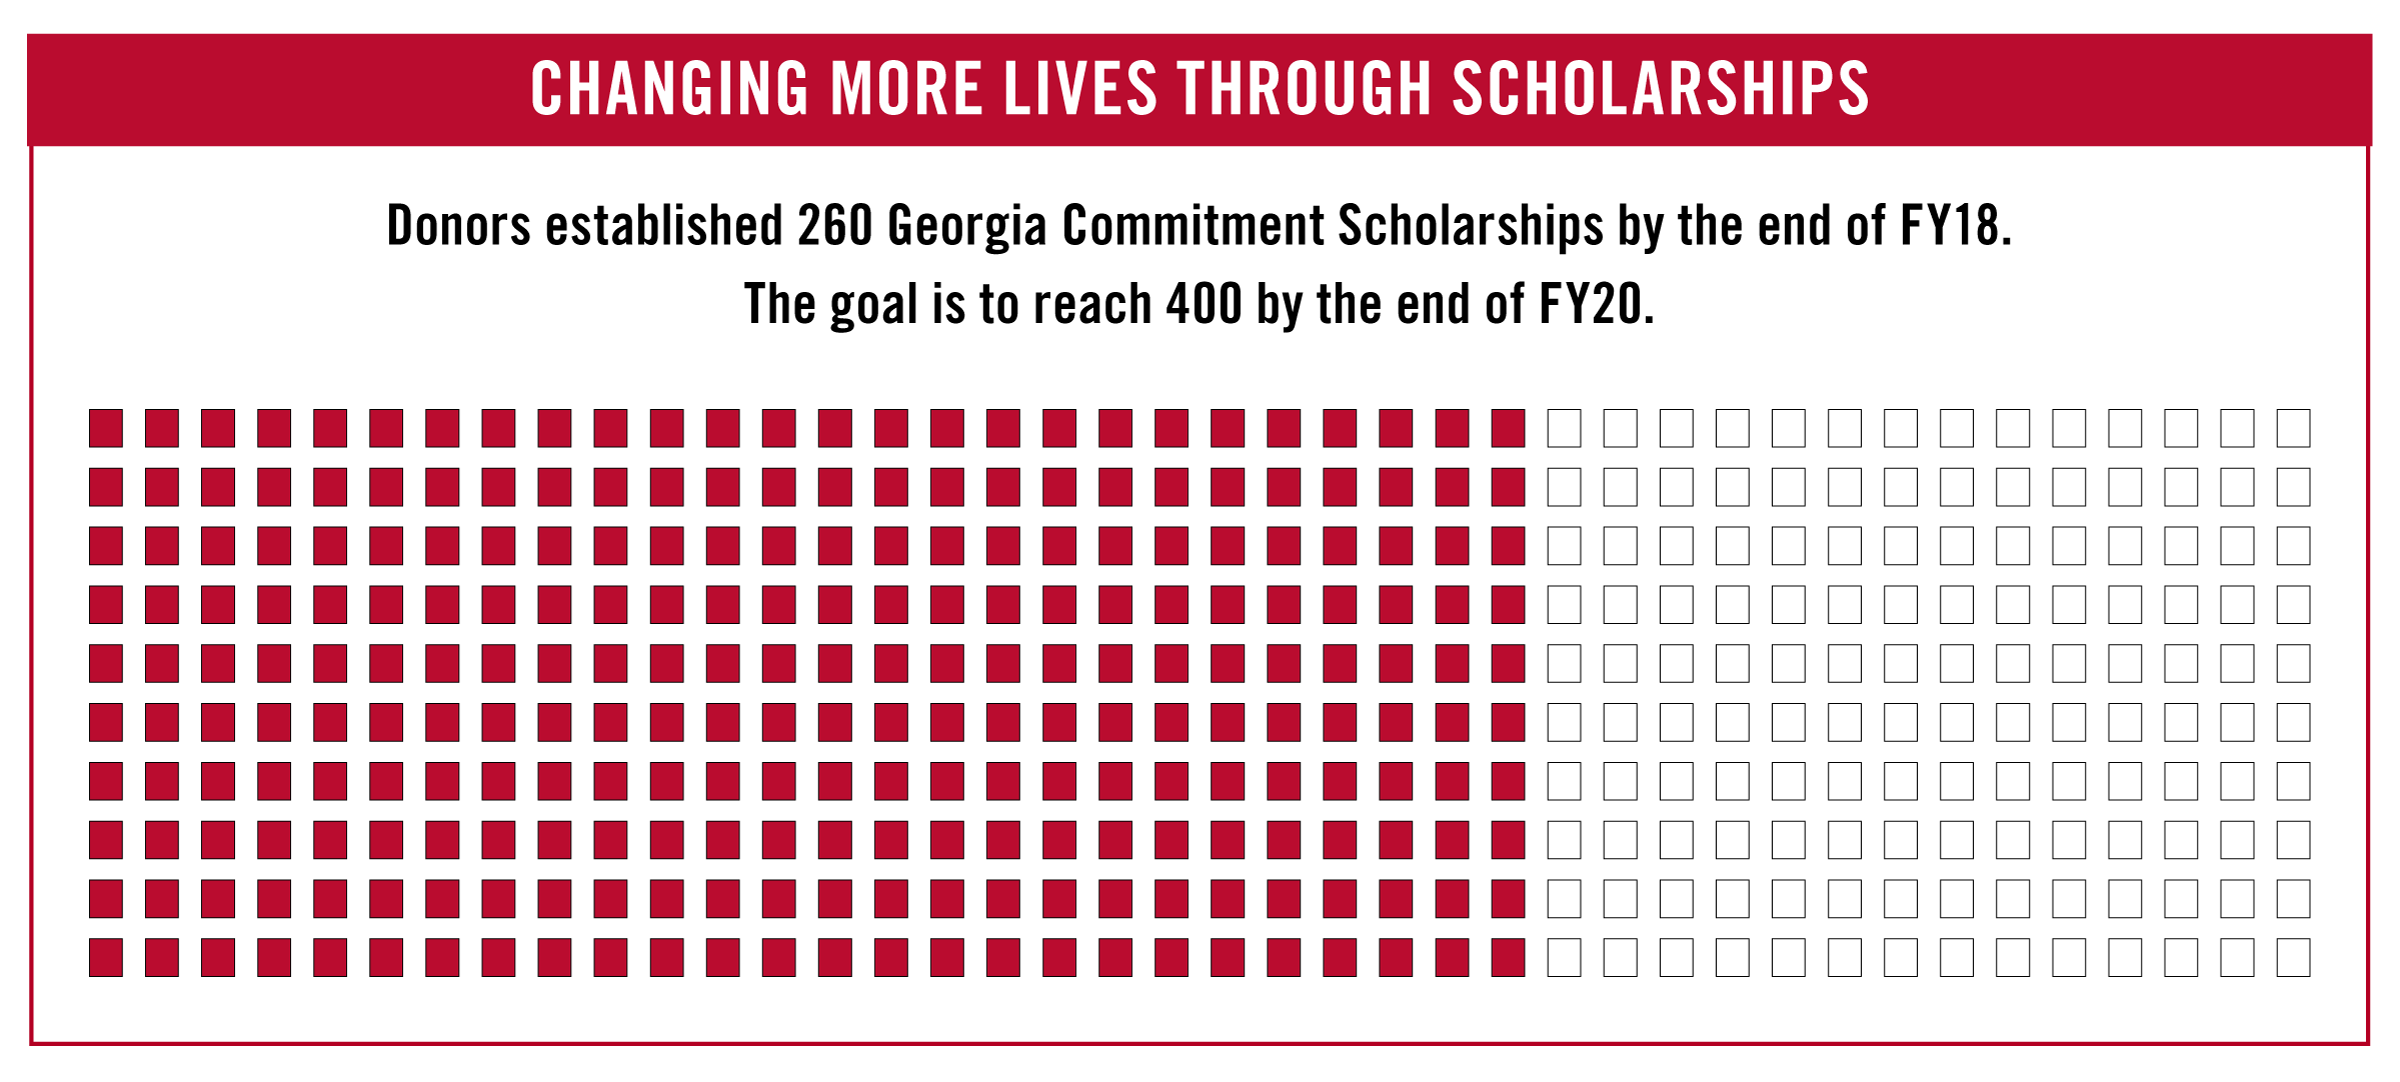 Donors established 260 Georgia Commitment Scholarships by the end of FY18. The goal is to reach 400 by the end of FY20